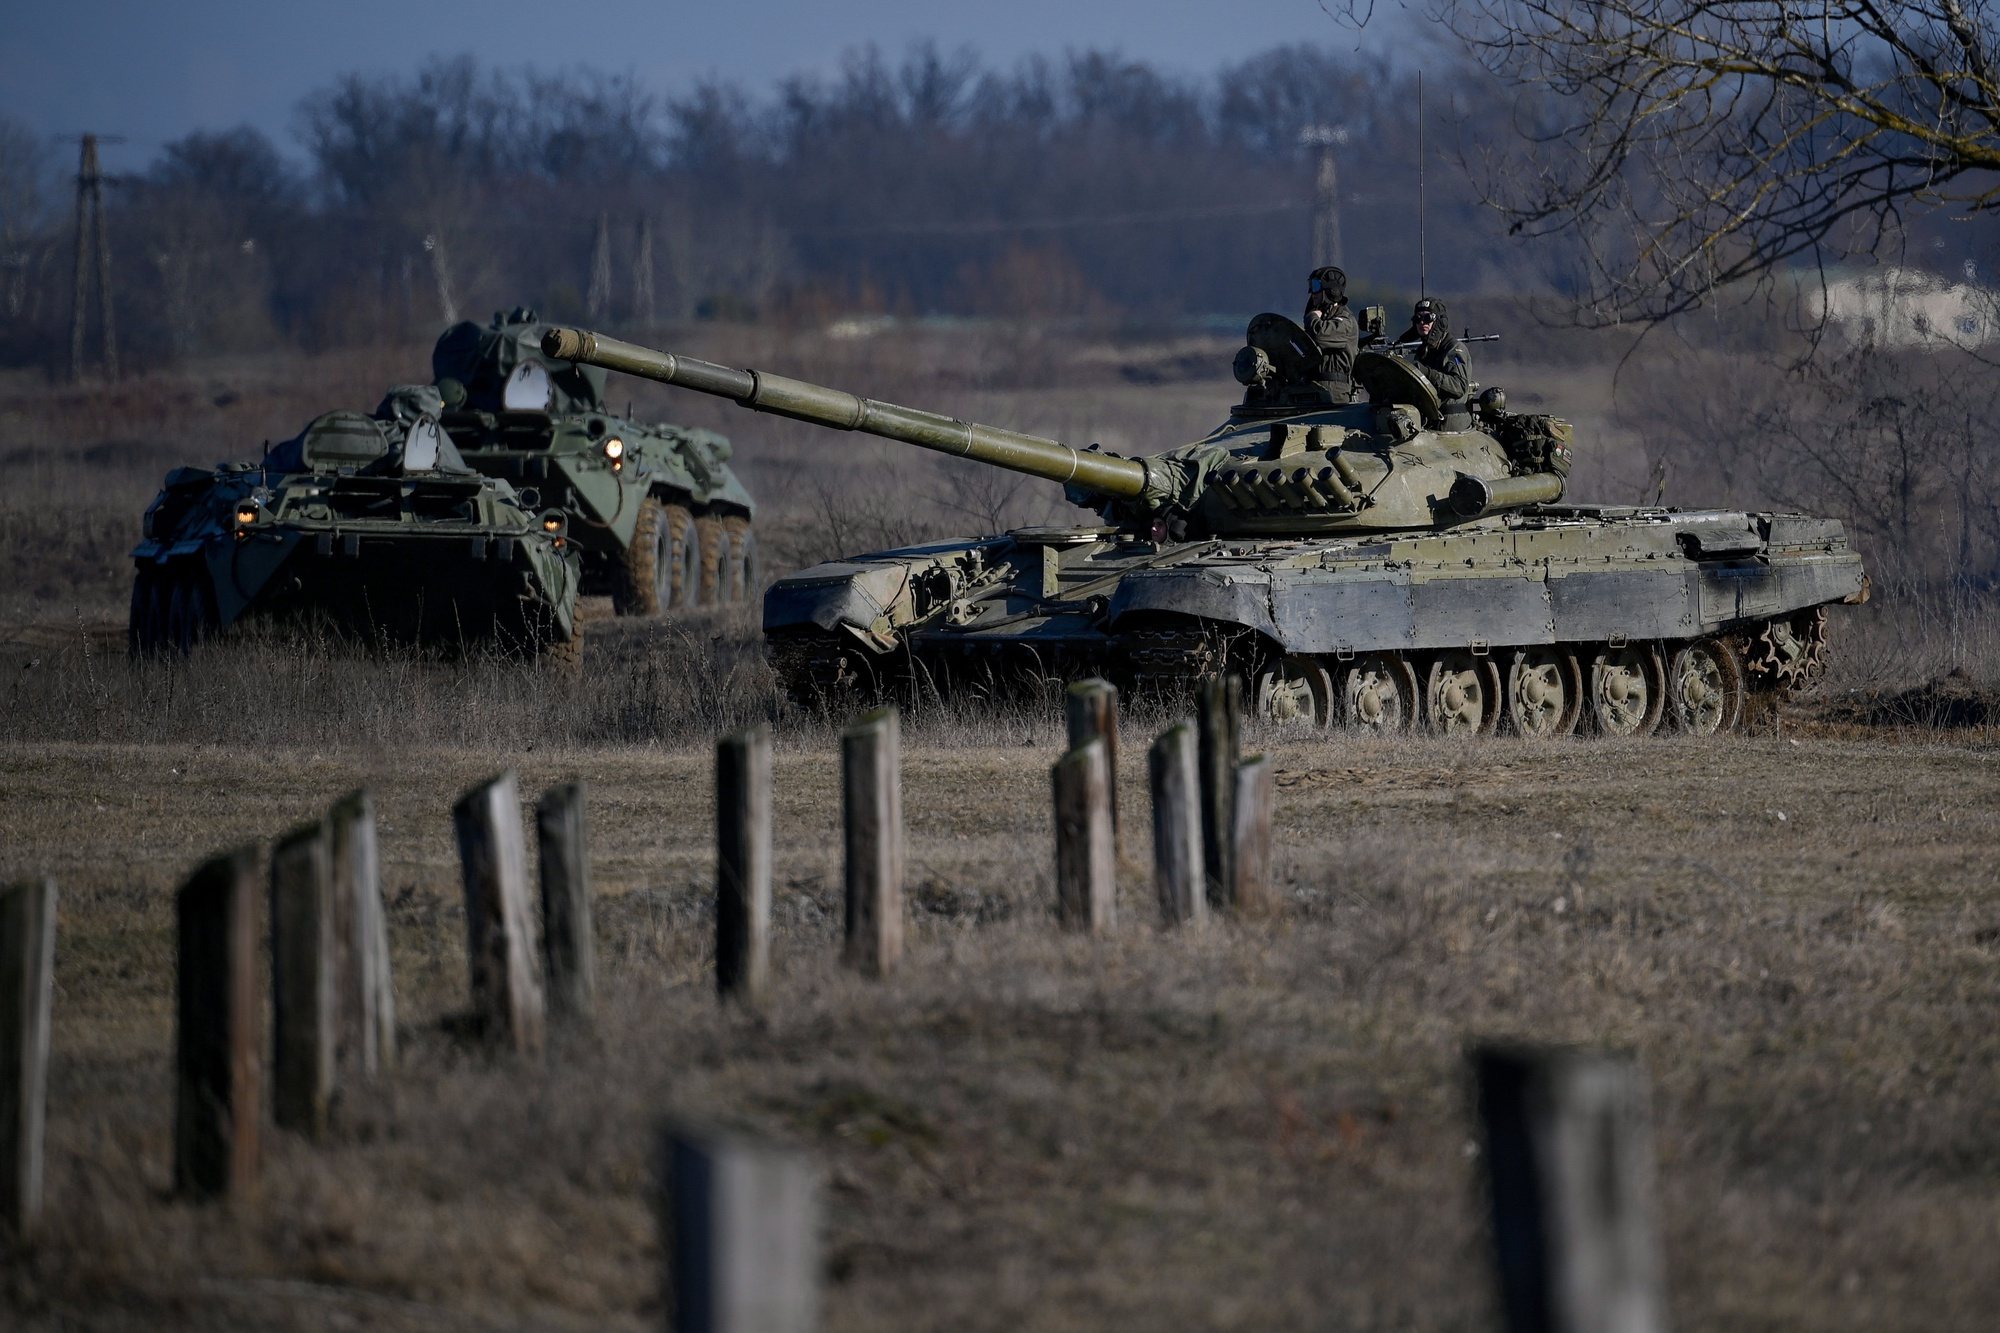 epa09782310 A T-72 battle tank and an armoured vehicle are seen at the Vay Adam training ground near Hajduhadhaz, Hungary 24 February 2022. Hungarian troops are being deployed to the eastern part of the country near the Ukrainian border both for national security reasons and humanitarian aid after Russian troops launched a major military operation on Ukraine on 24 February.  EPA/Zsolt Czegledi HUNGARY OUT